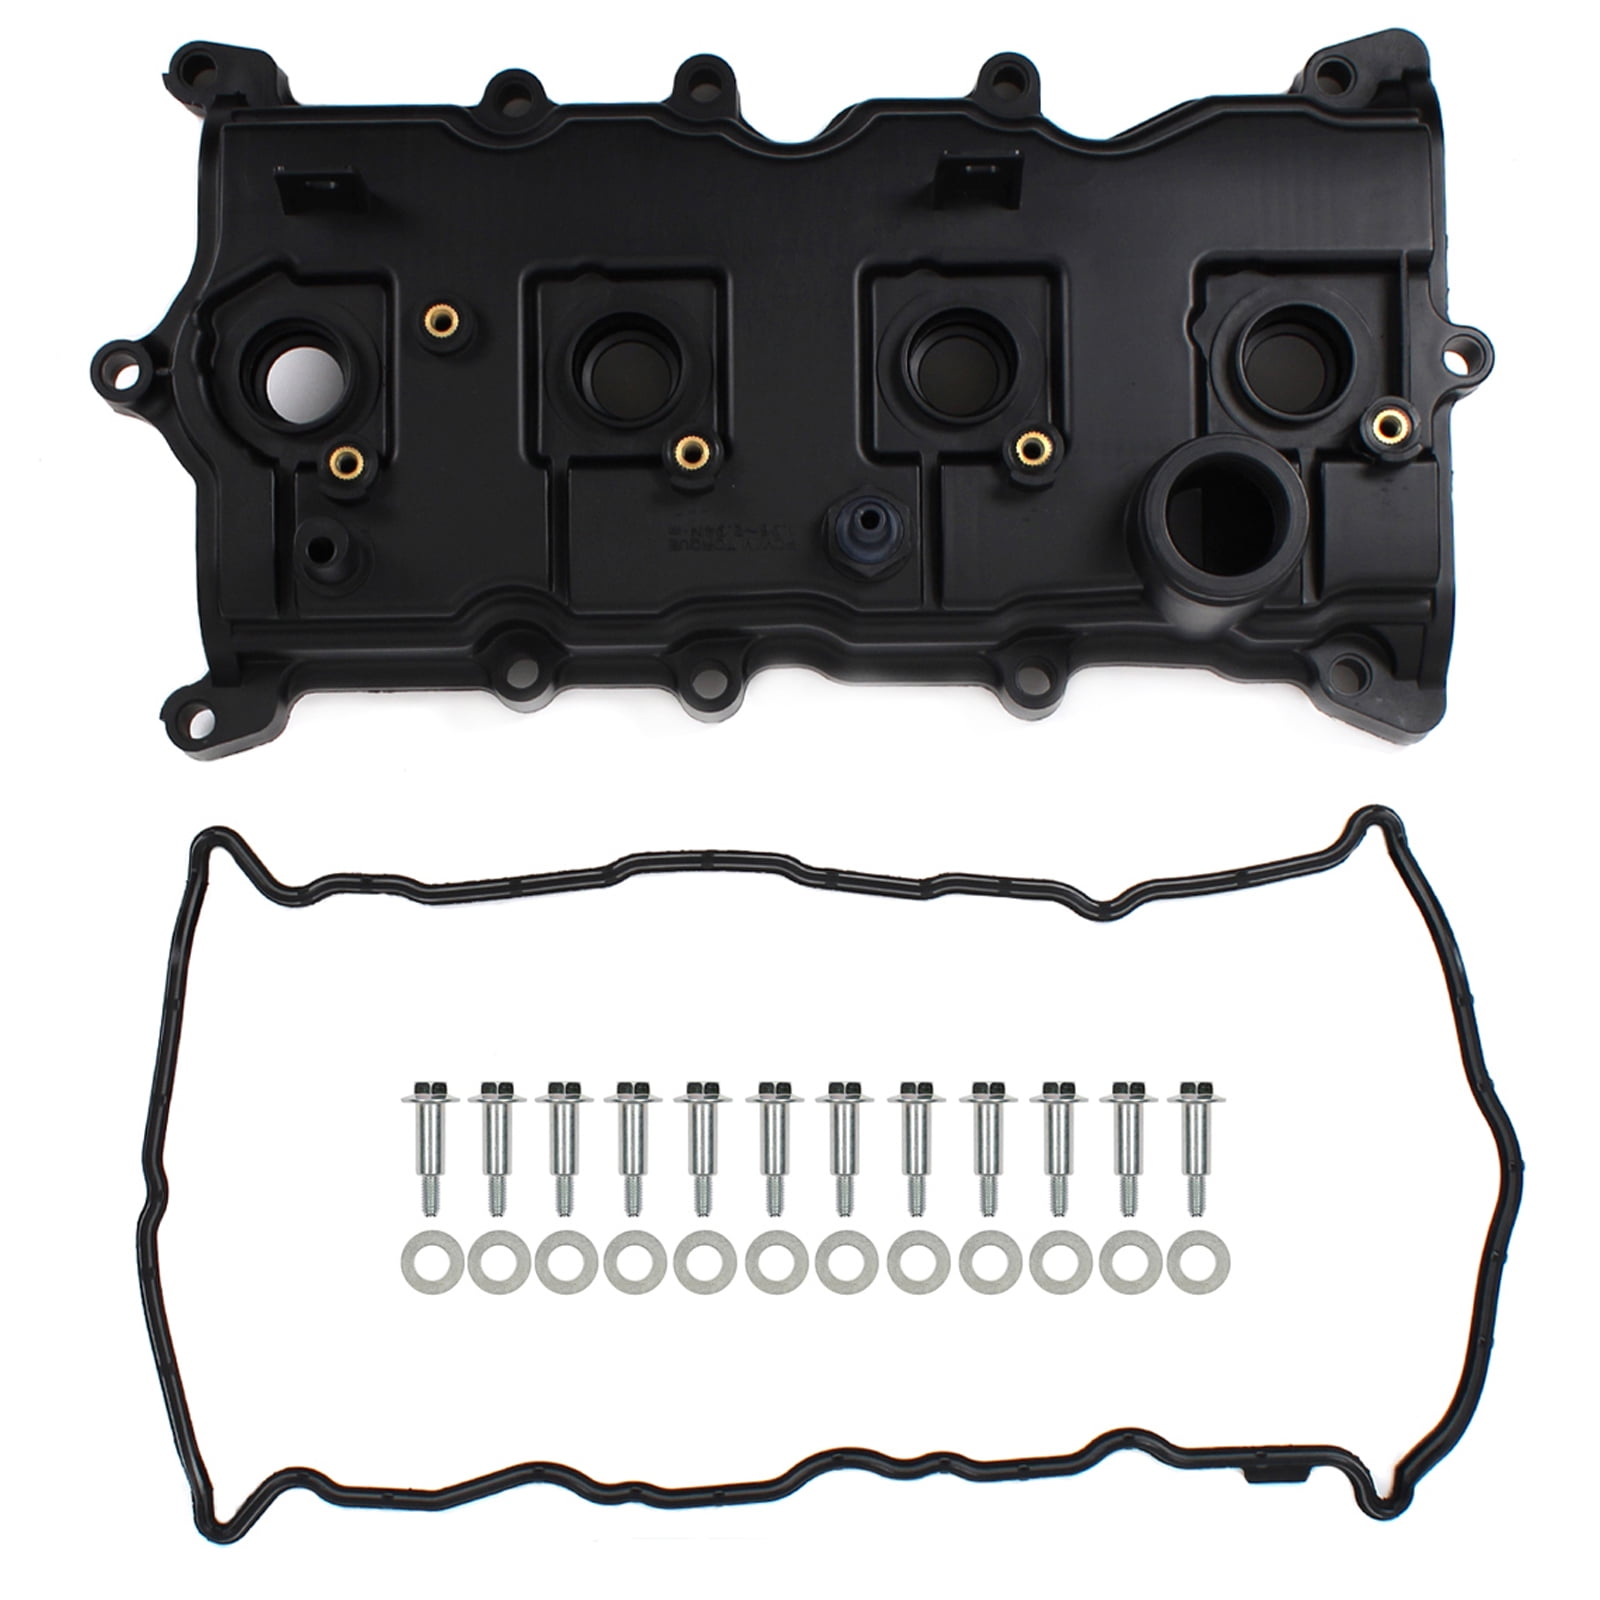 Garage-Pro Head Gasket Set Compatible with 2007-2012 Nissan Altima/Sentra with Cylinder Head Bolt 4 Cyl 2.5L eng.